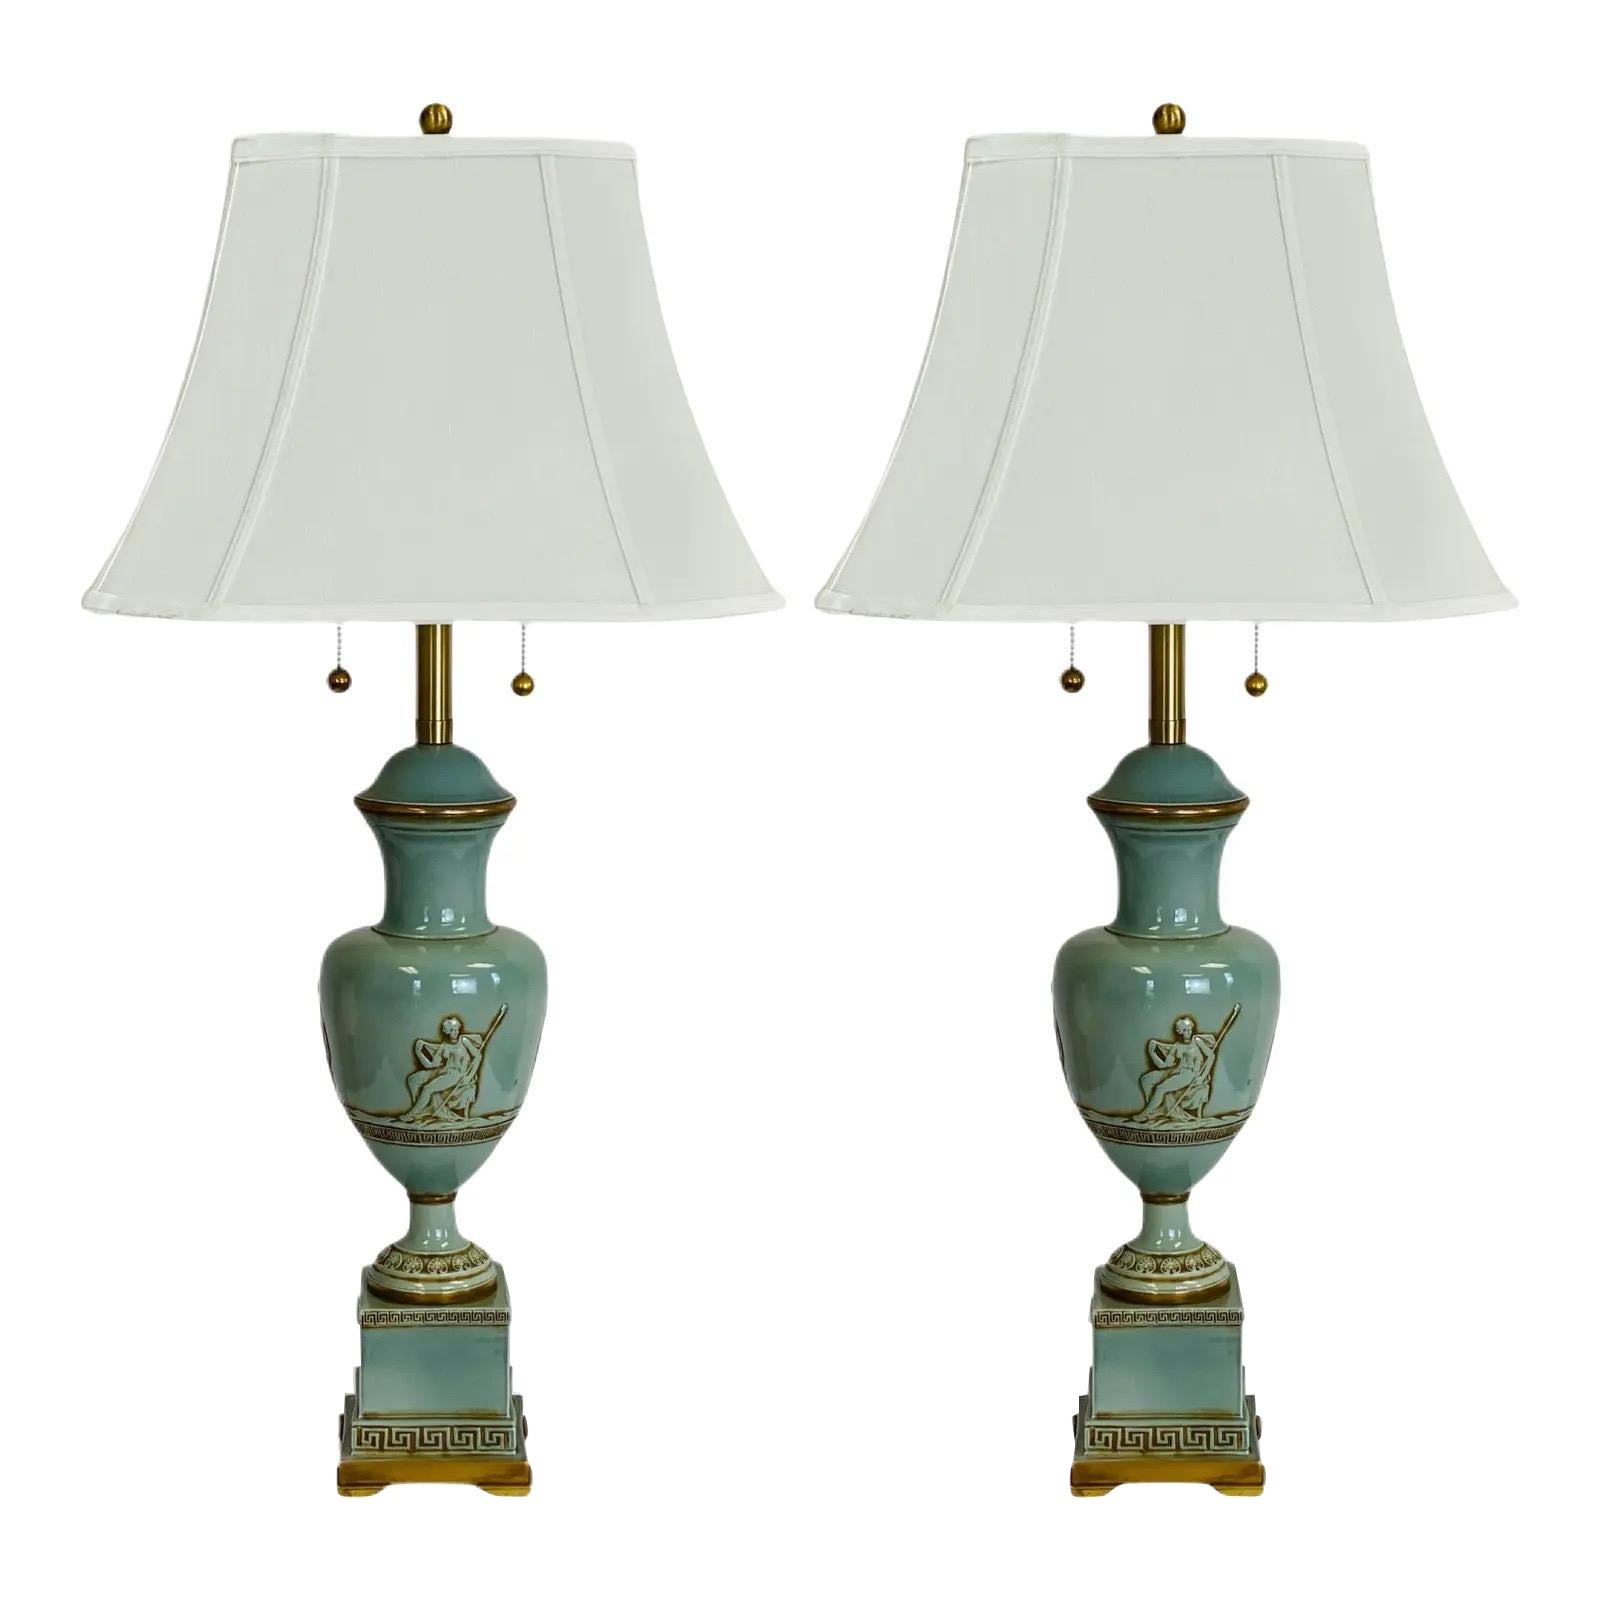 Vintage Neoclassical Marbro Sage Urn Table Lamps, a Pair